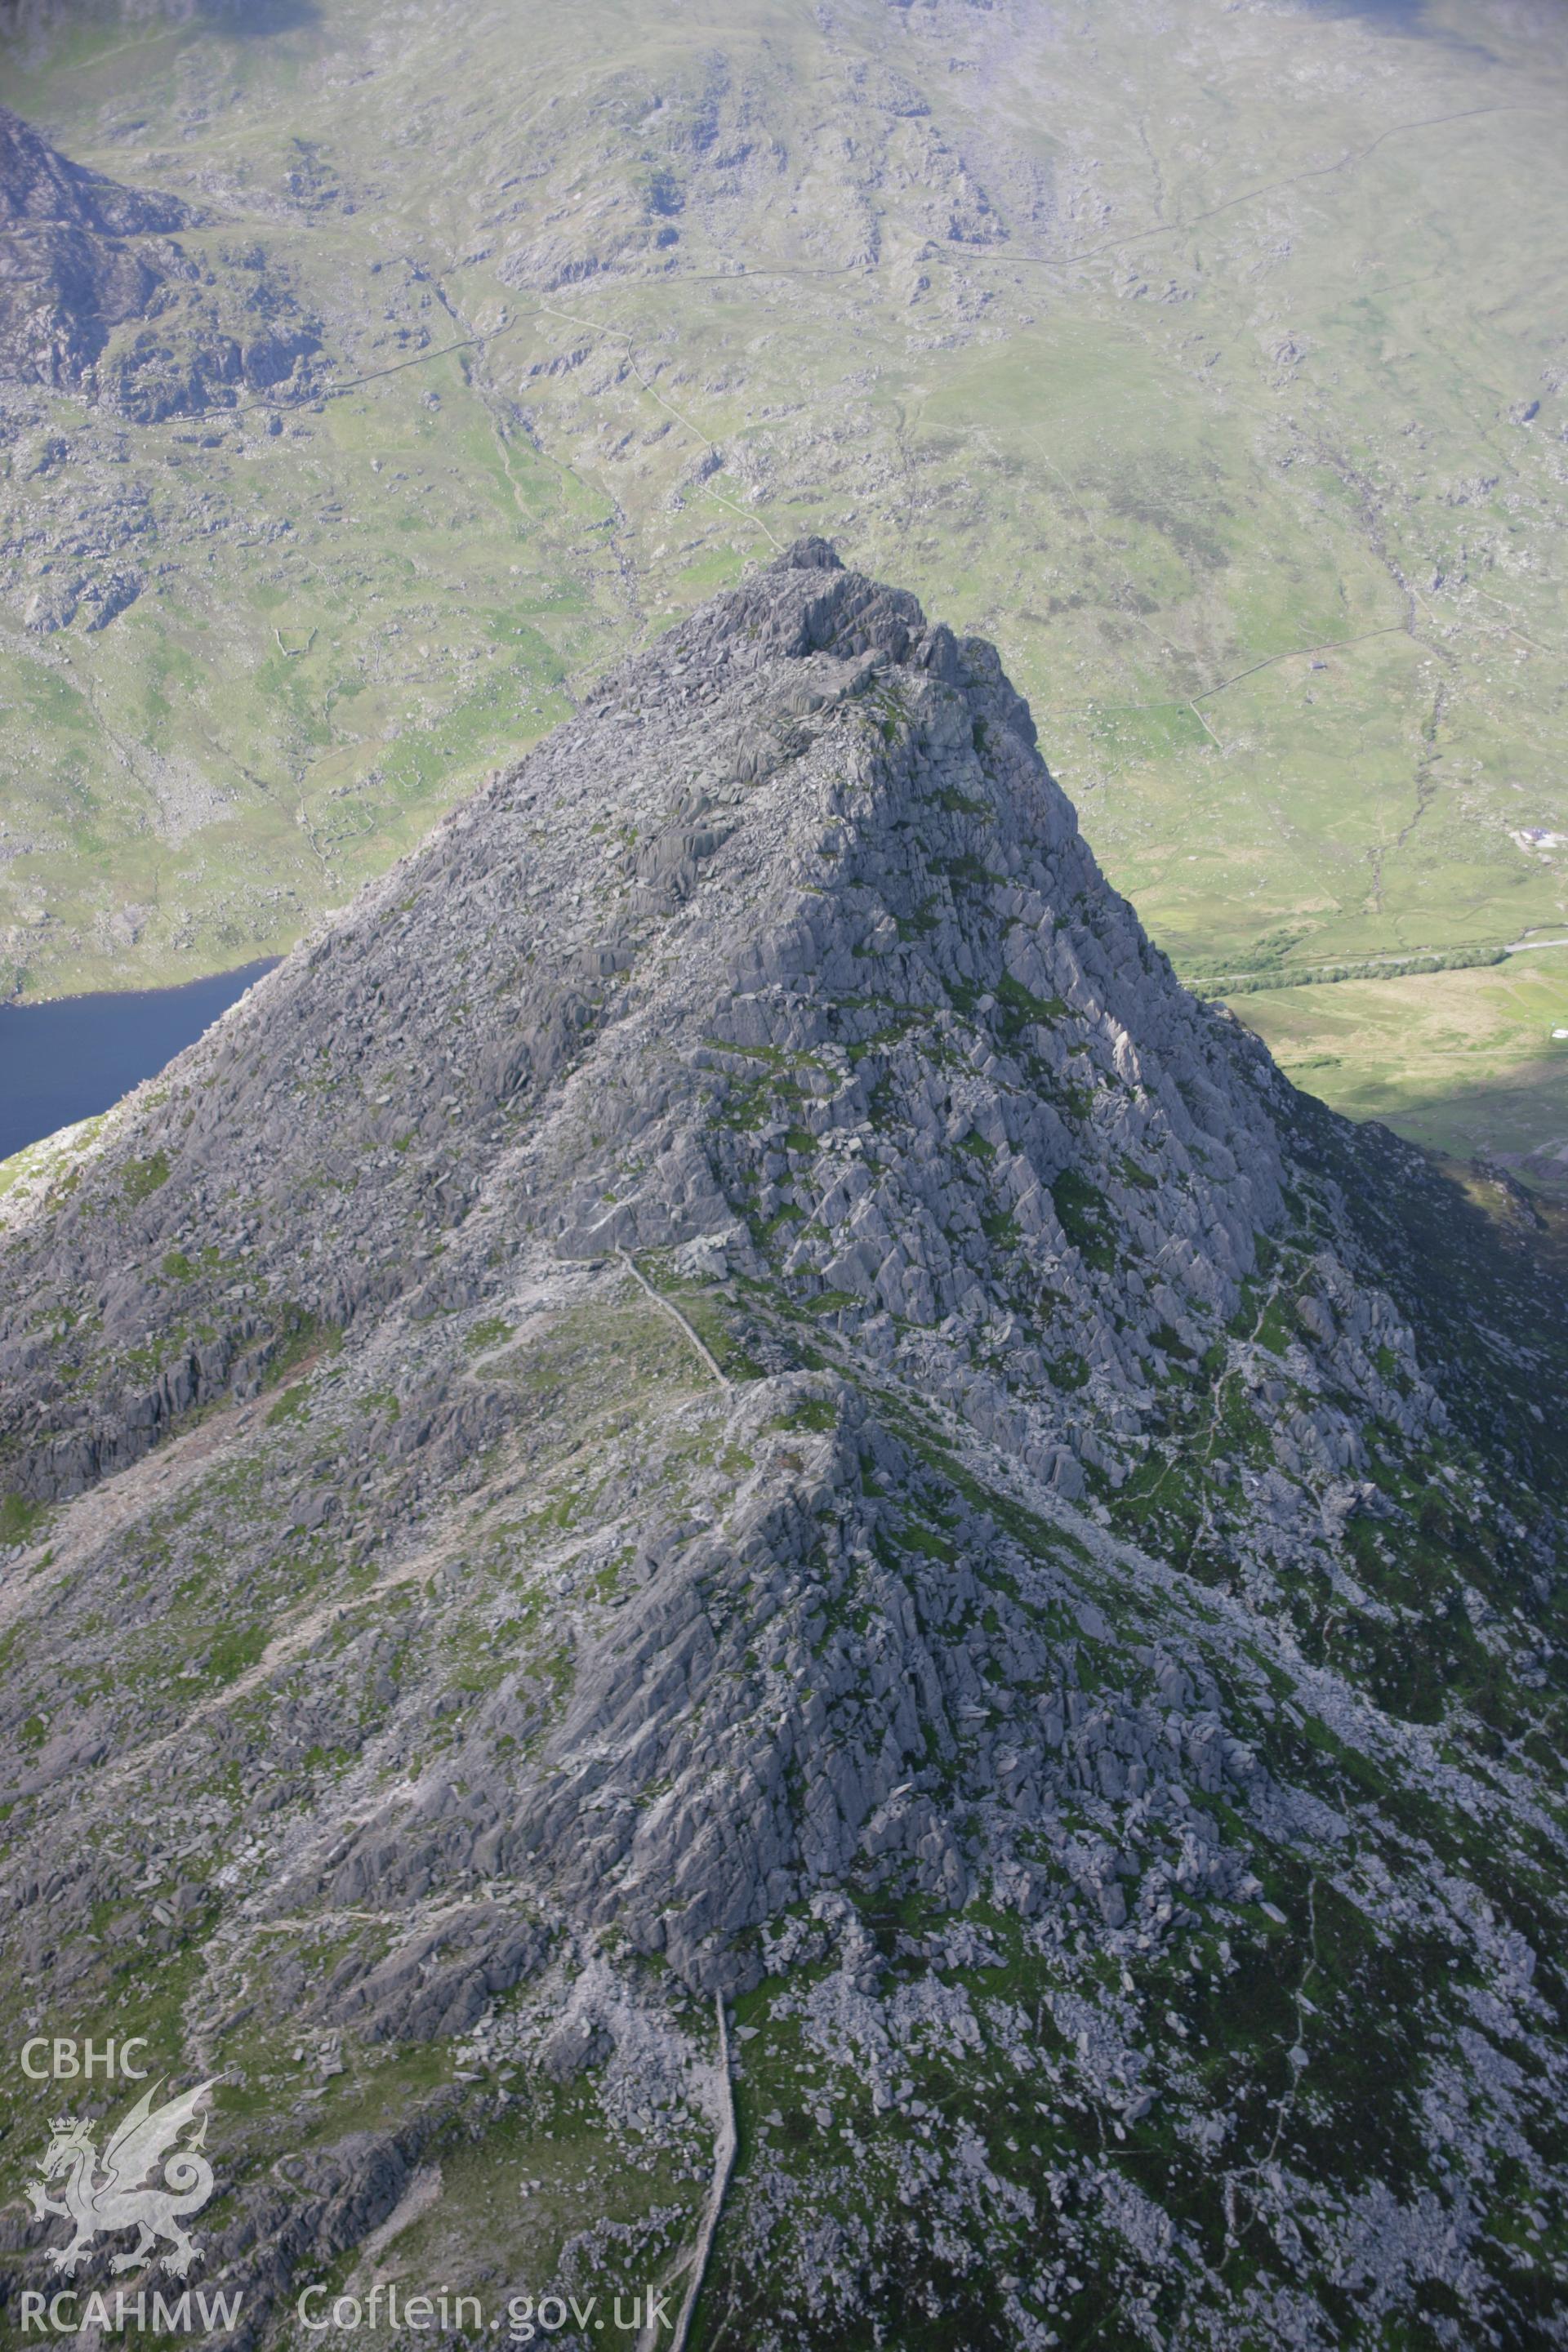 RCAHMW colour oblique aerial photograph of Tryfan from the south. Taken on 14 June 2006 by Toby Driver.